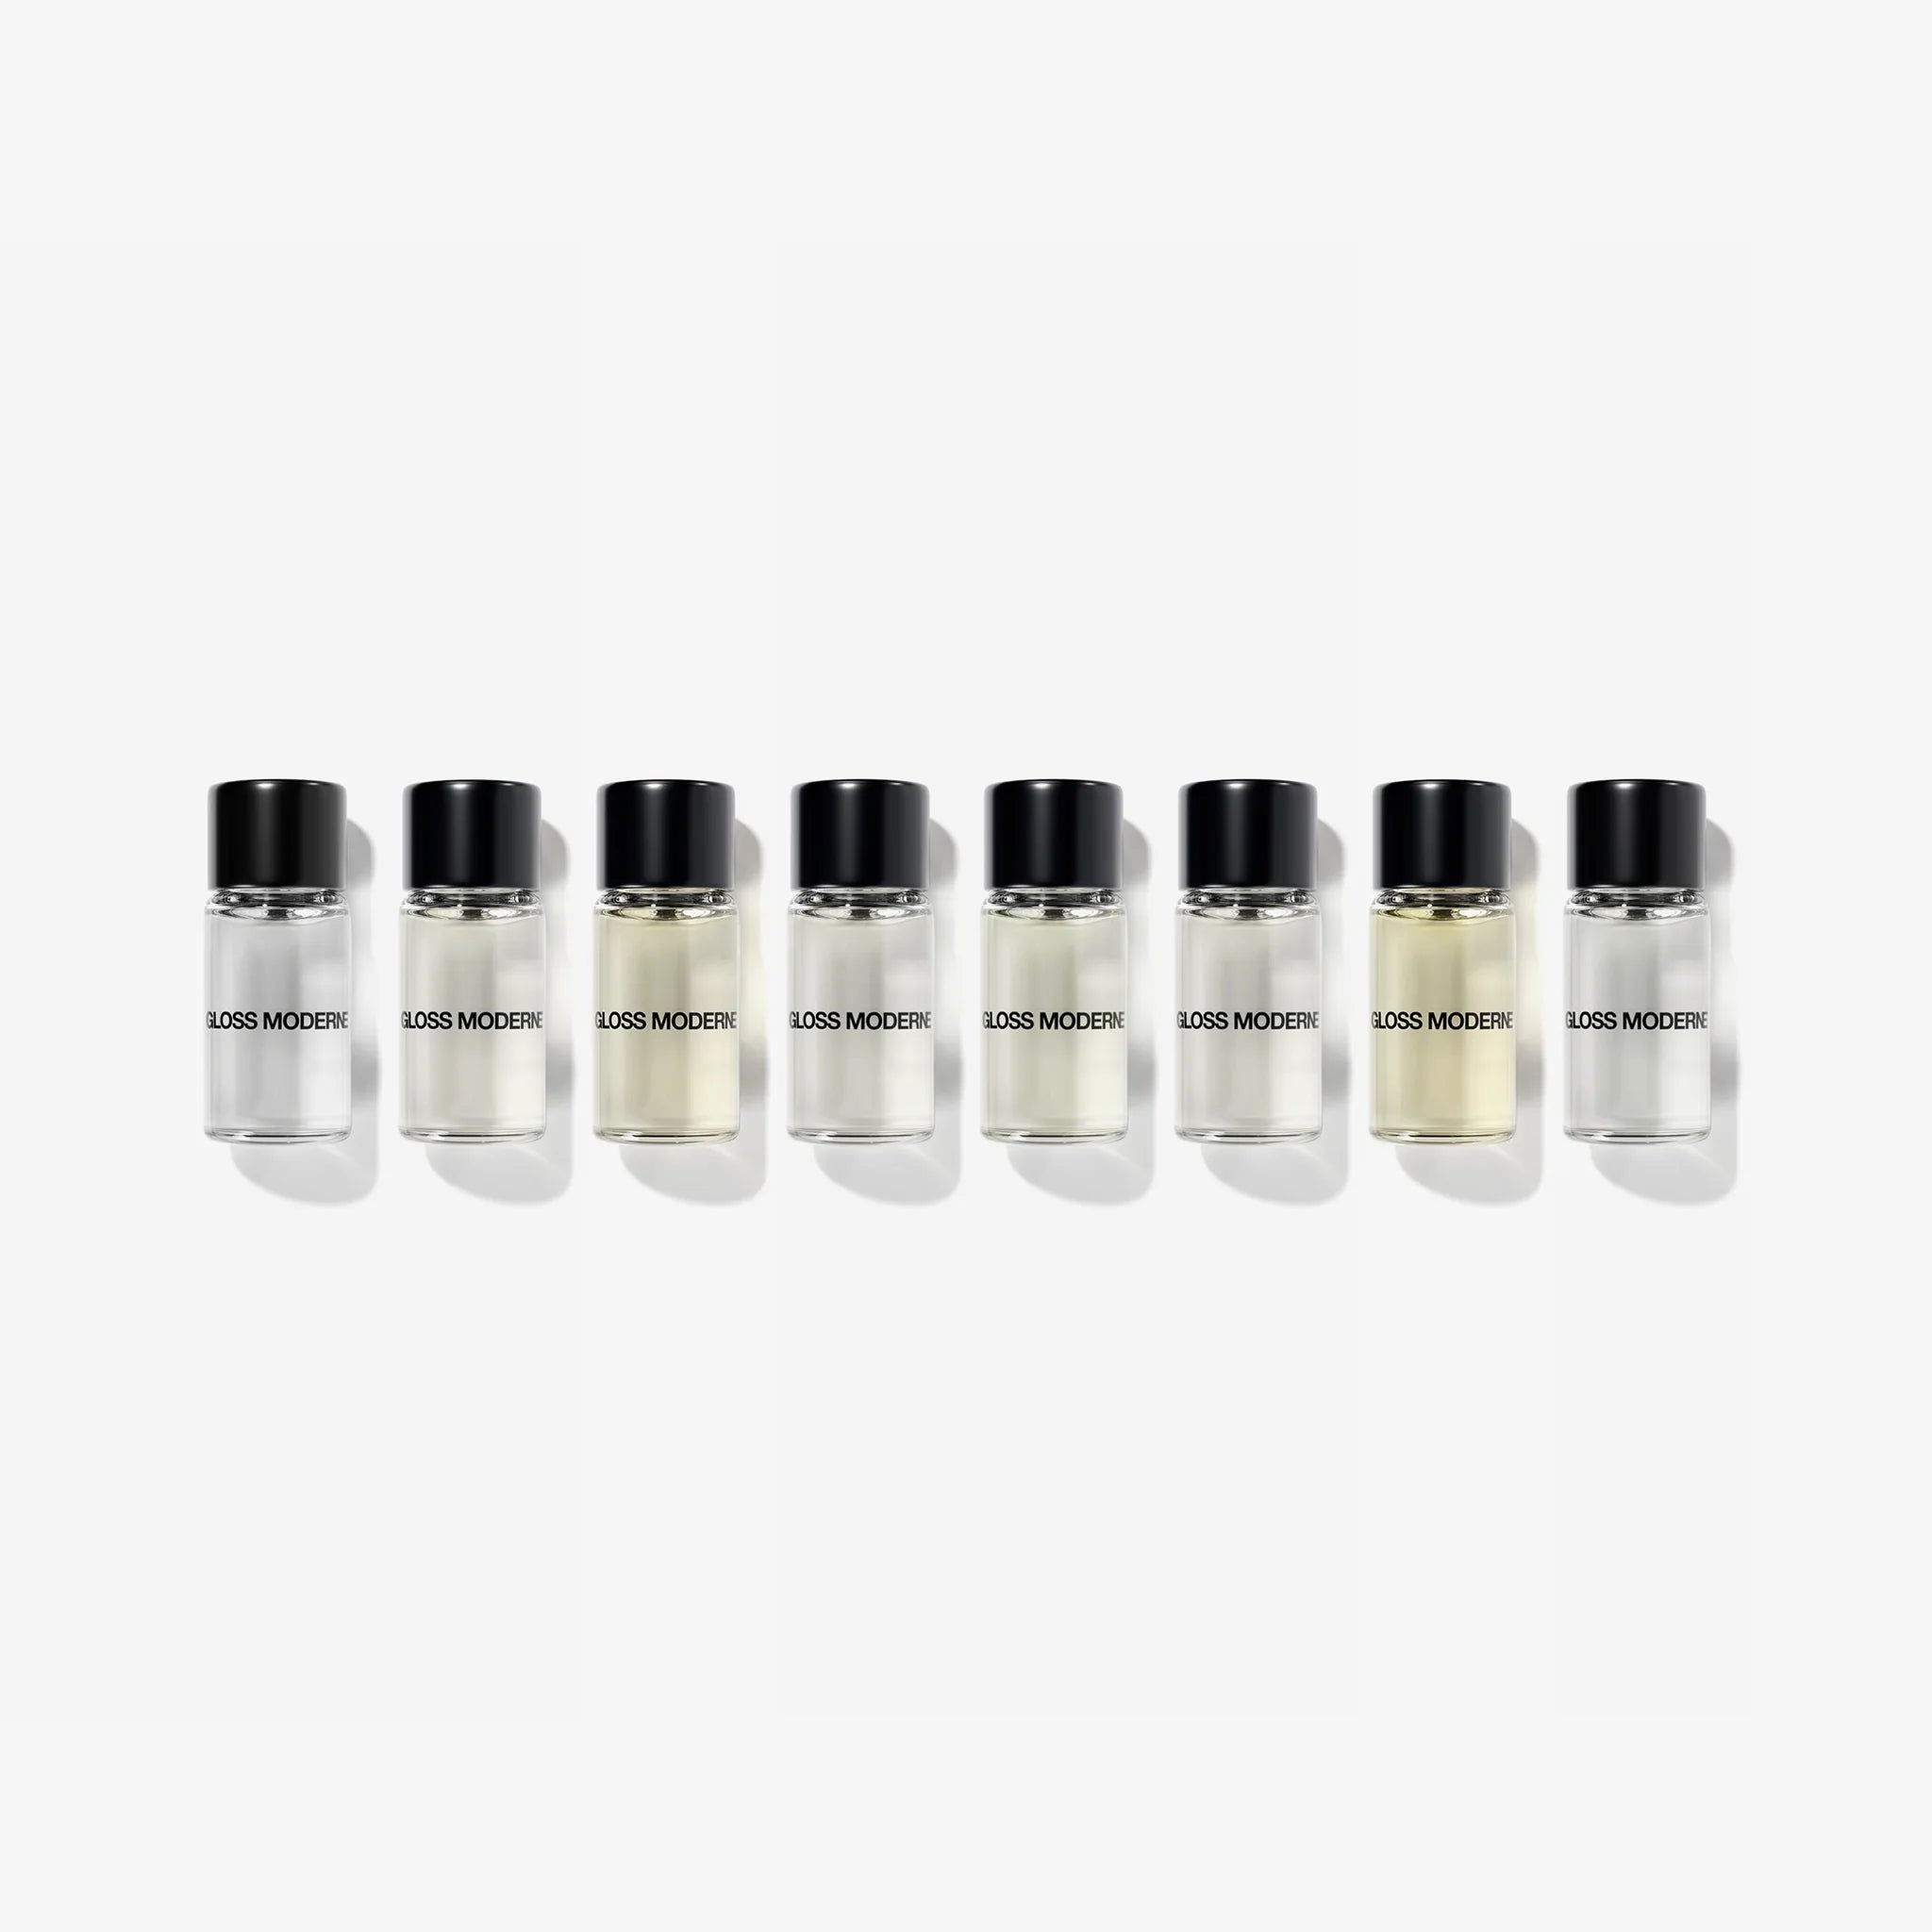 Clean Luxury Fragrance Discovery Set Vol. 3 - Perfume Oil